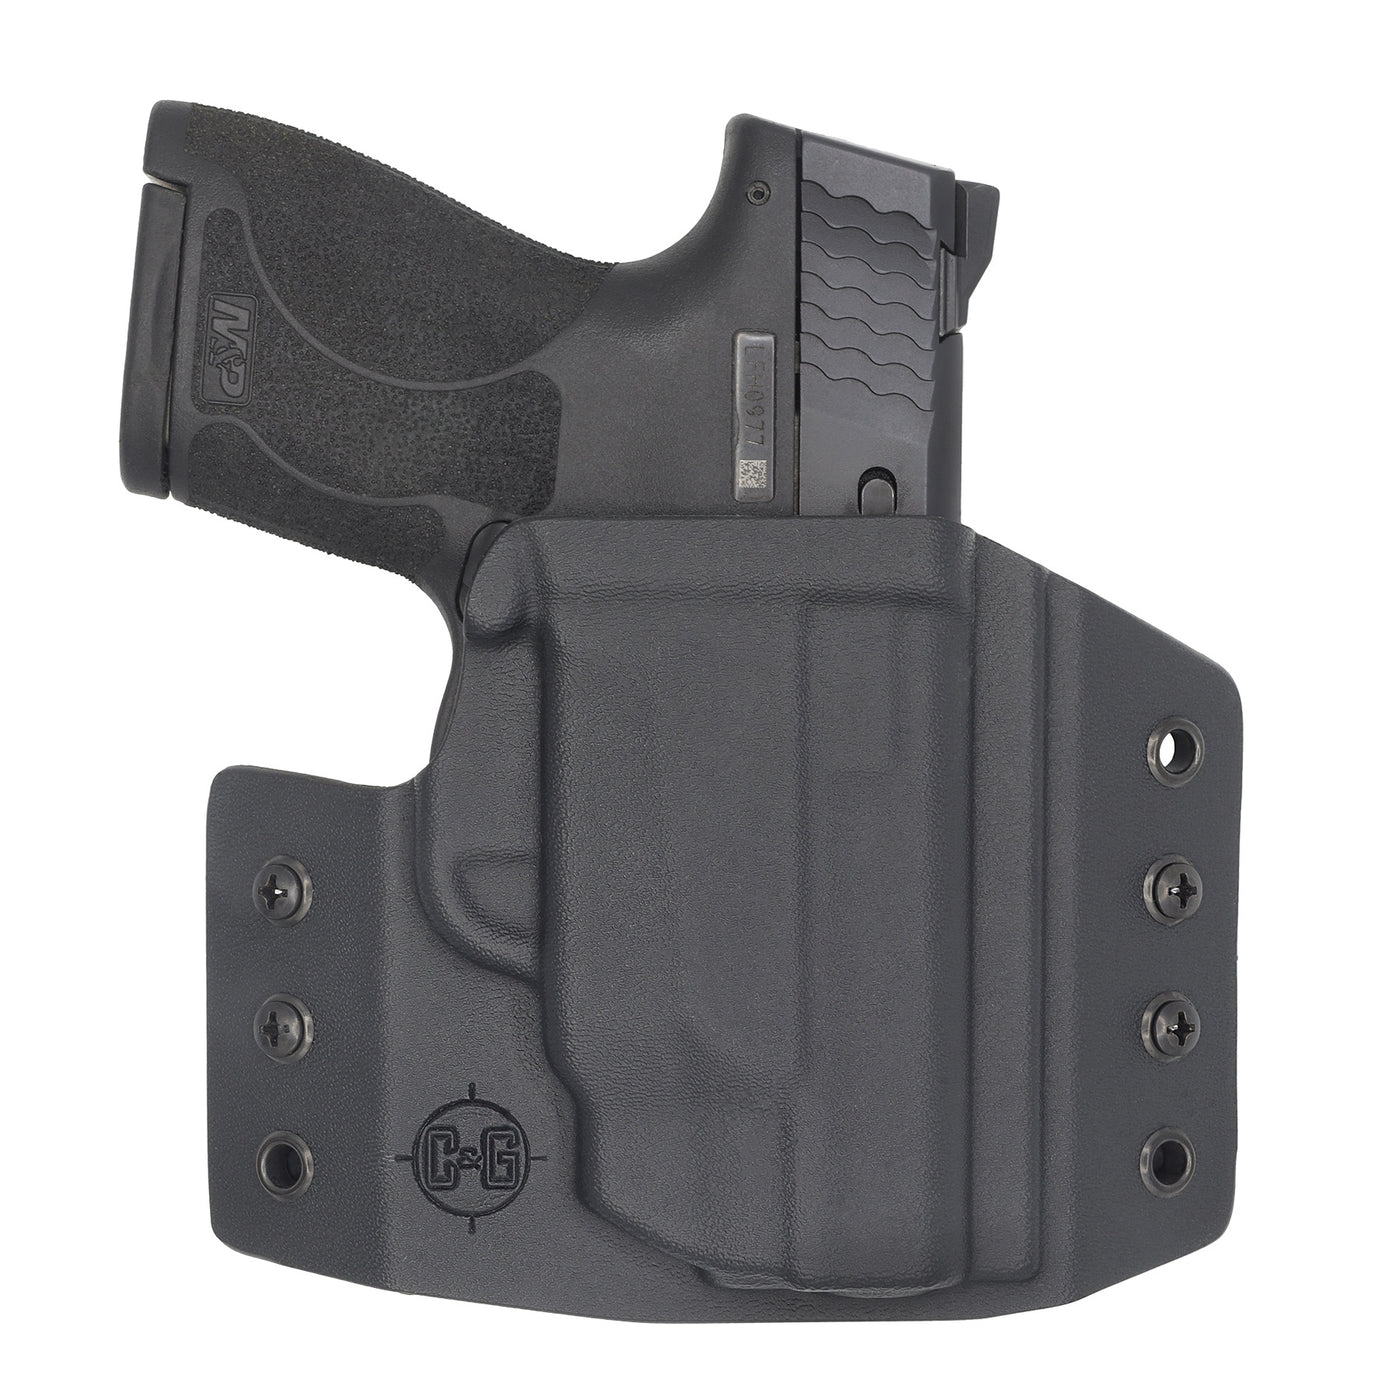 This is the custom C&G Holsters Covert series (OWB) outside the waistband Holster for the Smith & Wesson M&P Shield with crimson trace laser in holstered position